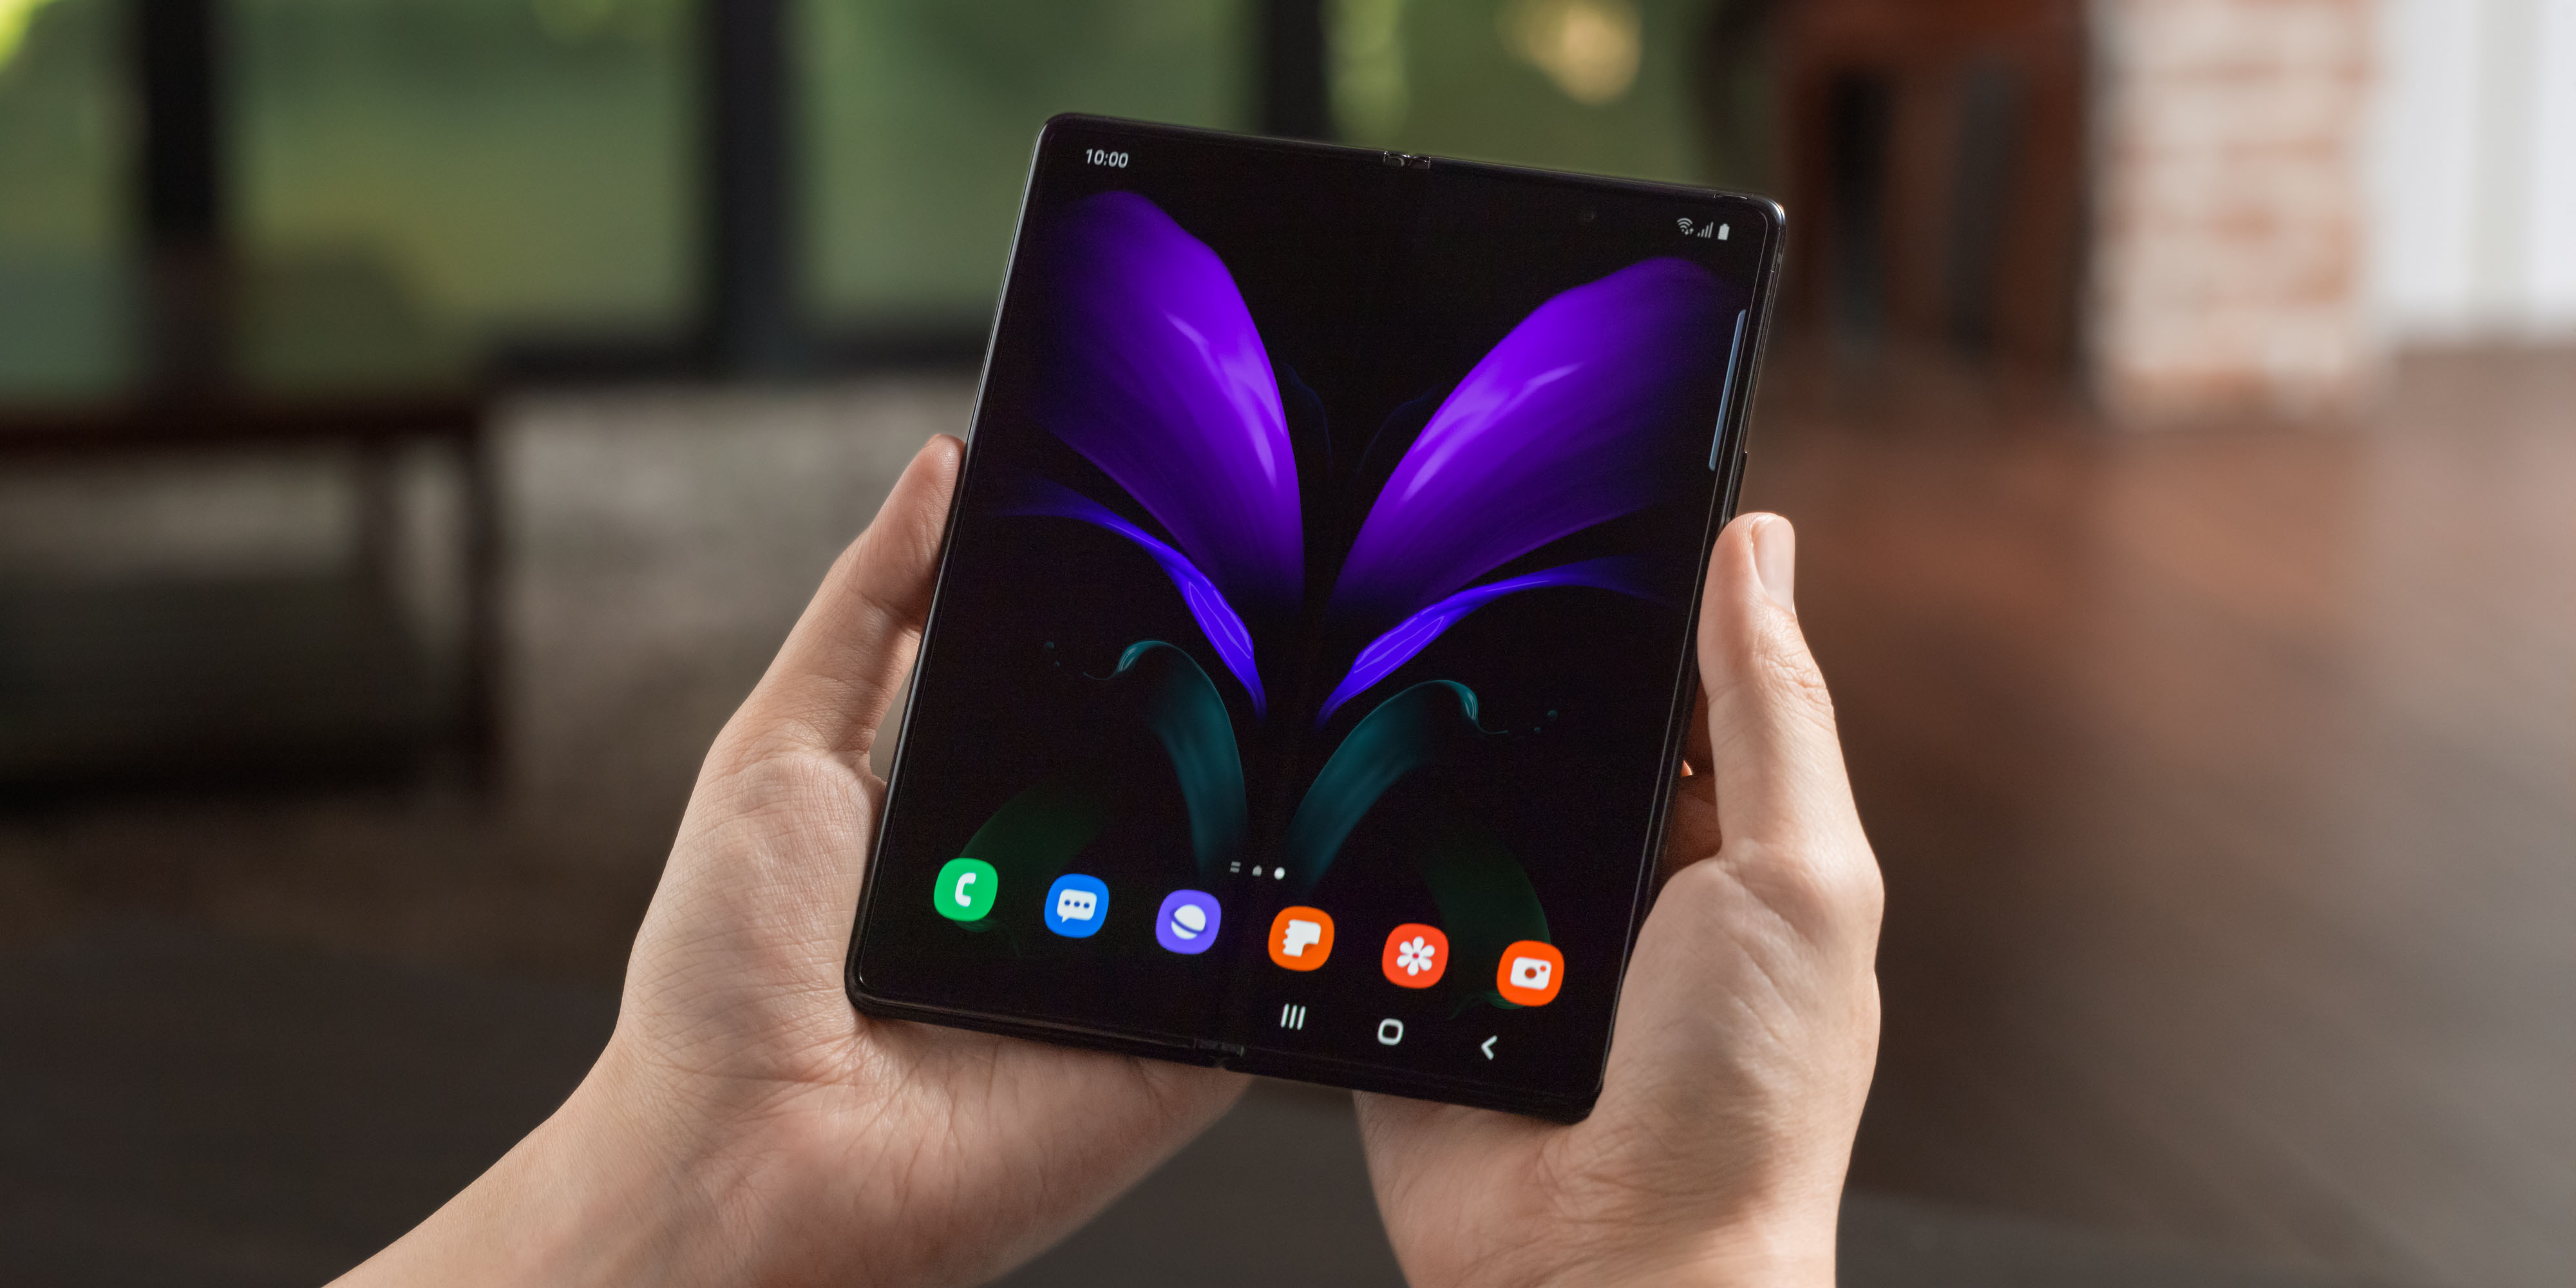 Samsung Galaxy Z Fold 2 price, specs go official - 9to5Google